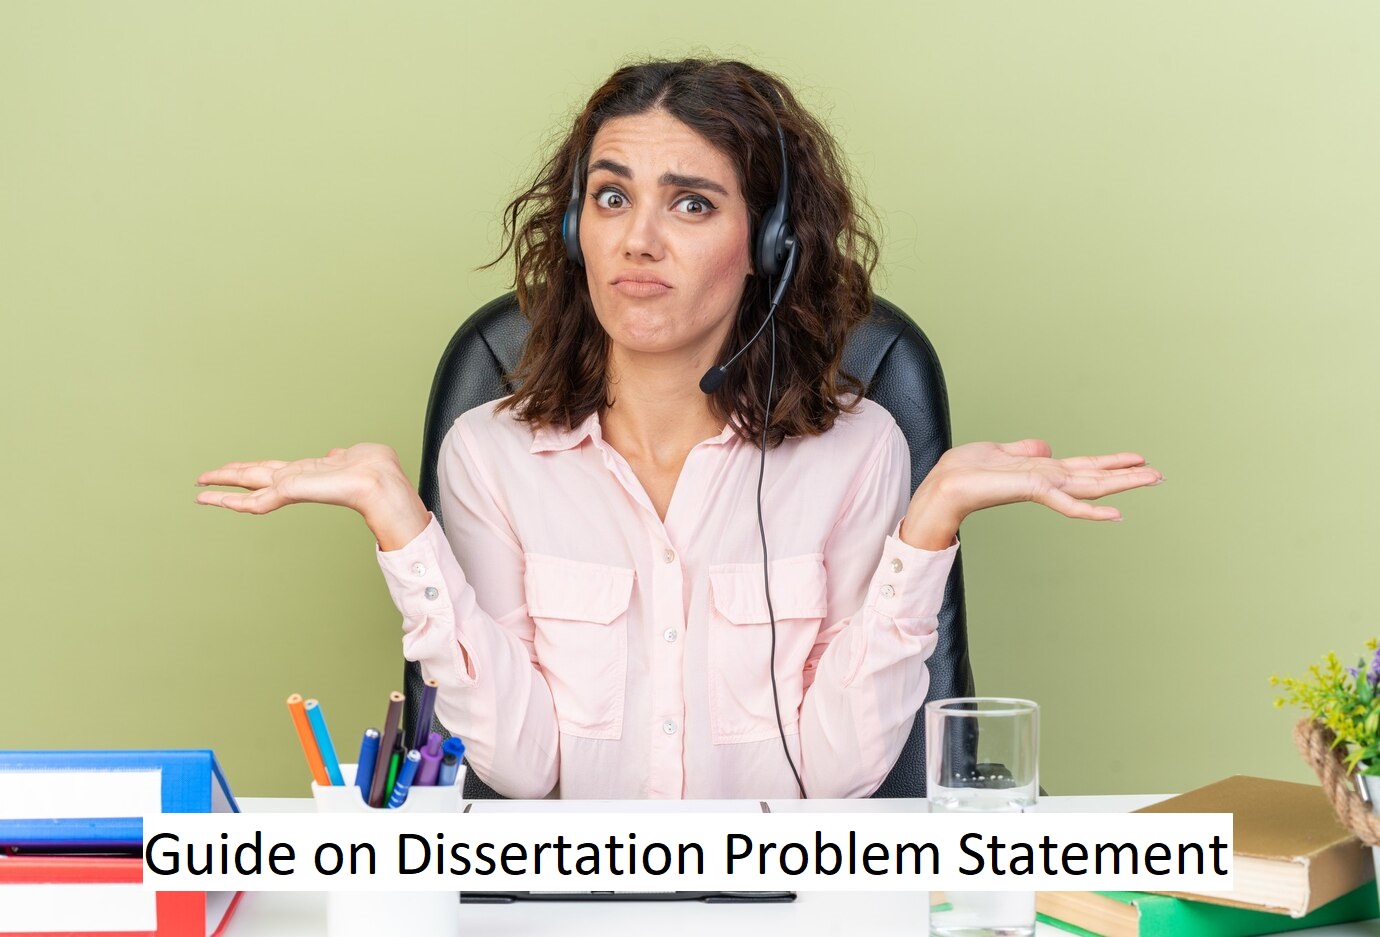 Guide on How To Compose A Dissertation’s Problem Statement